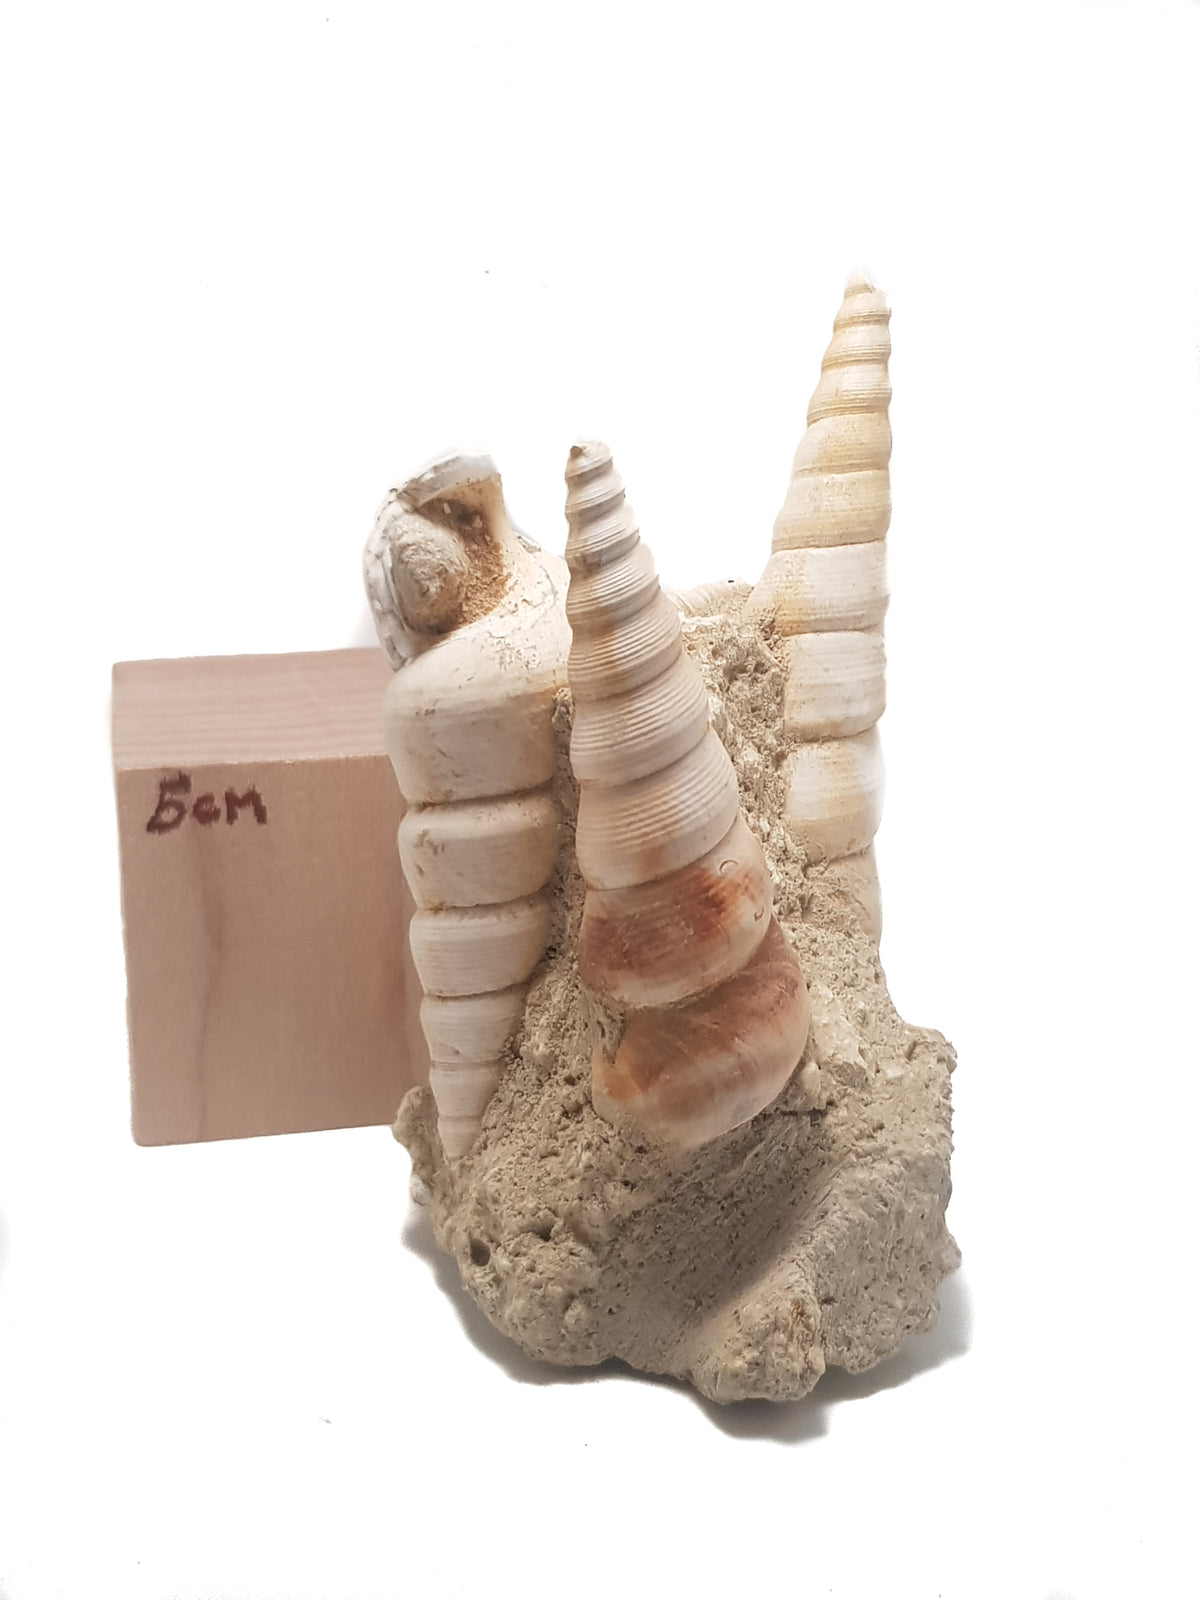 Bivalves and gastropods from the Paris Basin.